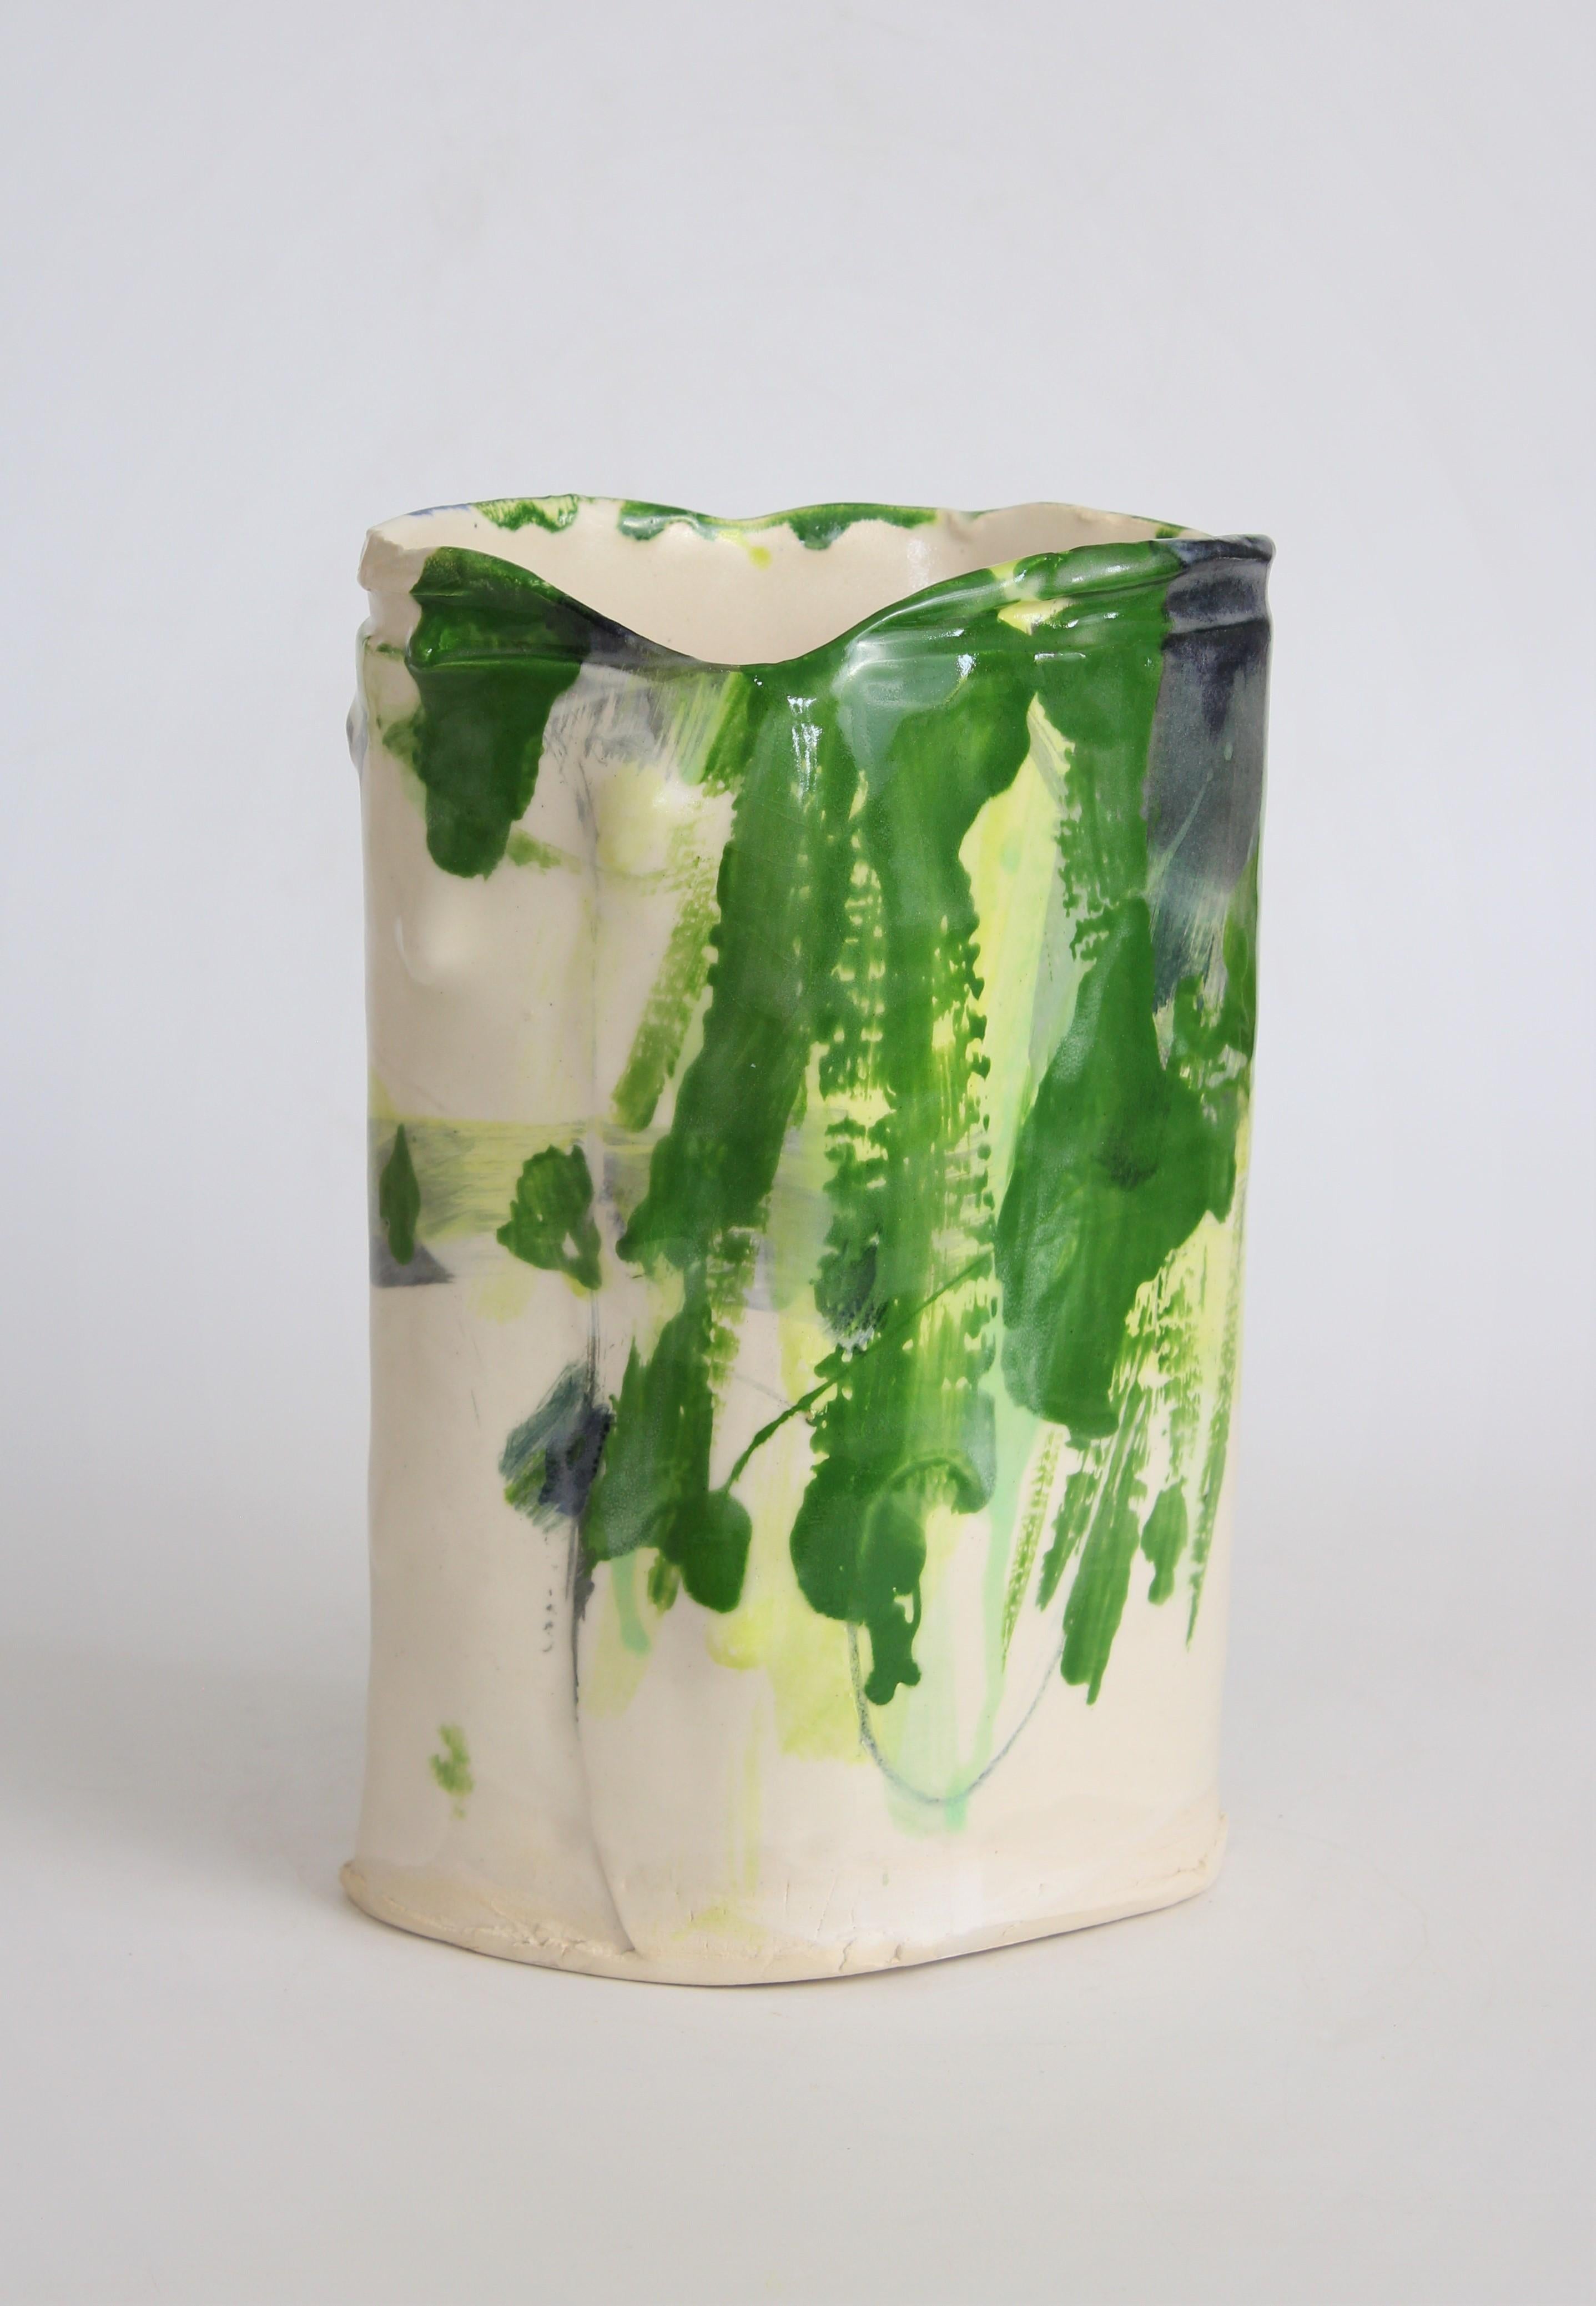 This ceramic vessel is one of Barry’s iconic soft slab formed works. His ceramics are influenced by drawings made within the land, exploring relationships between colour, texture and form, and motivated by surrounding light, atmosphere and colours. 